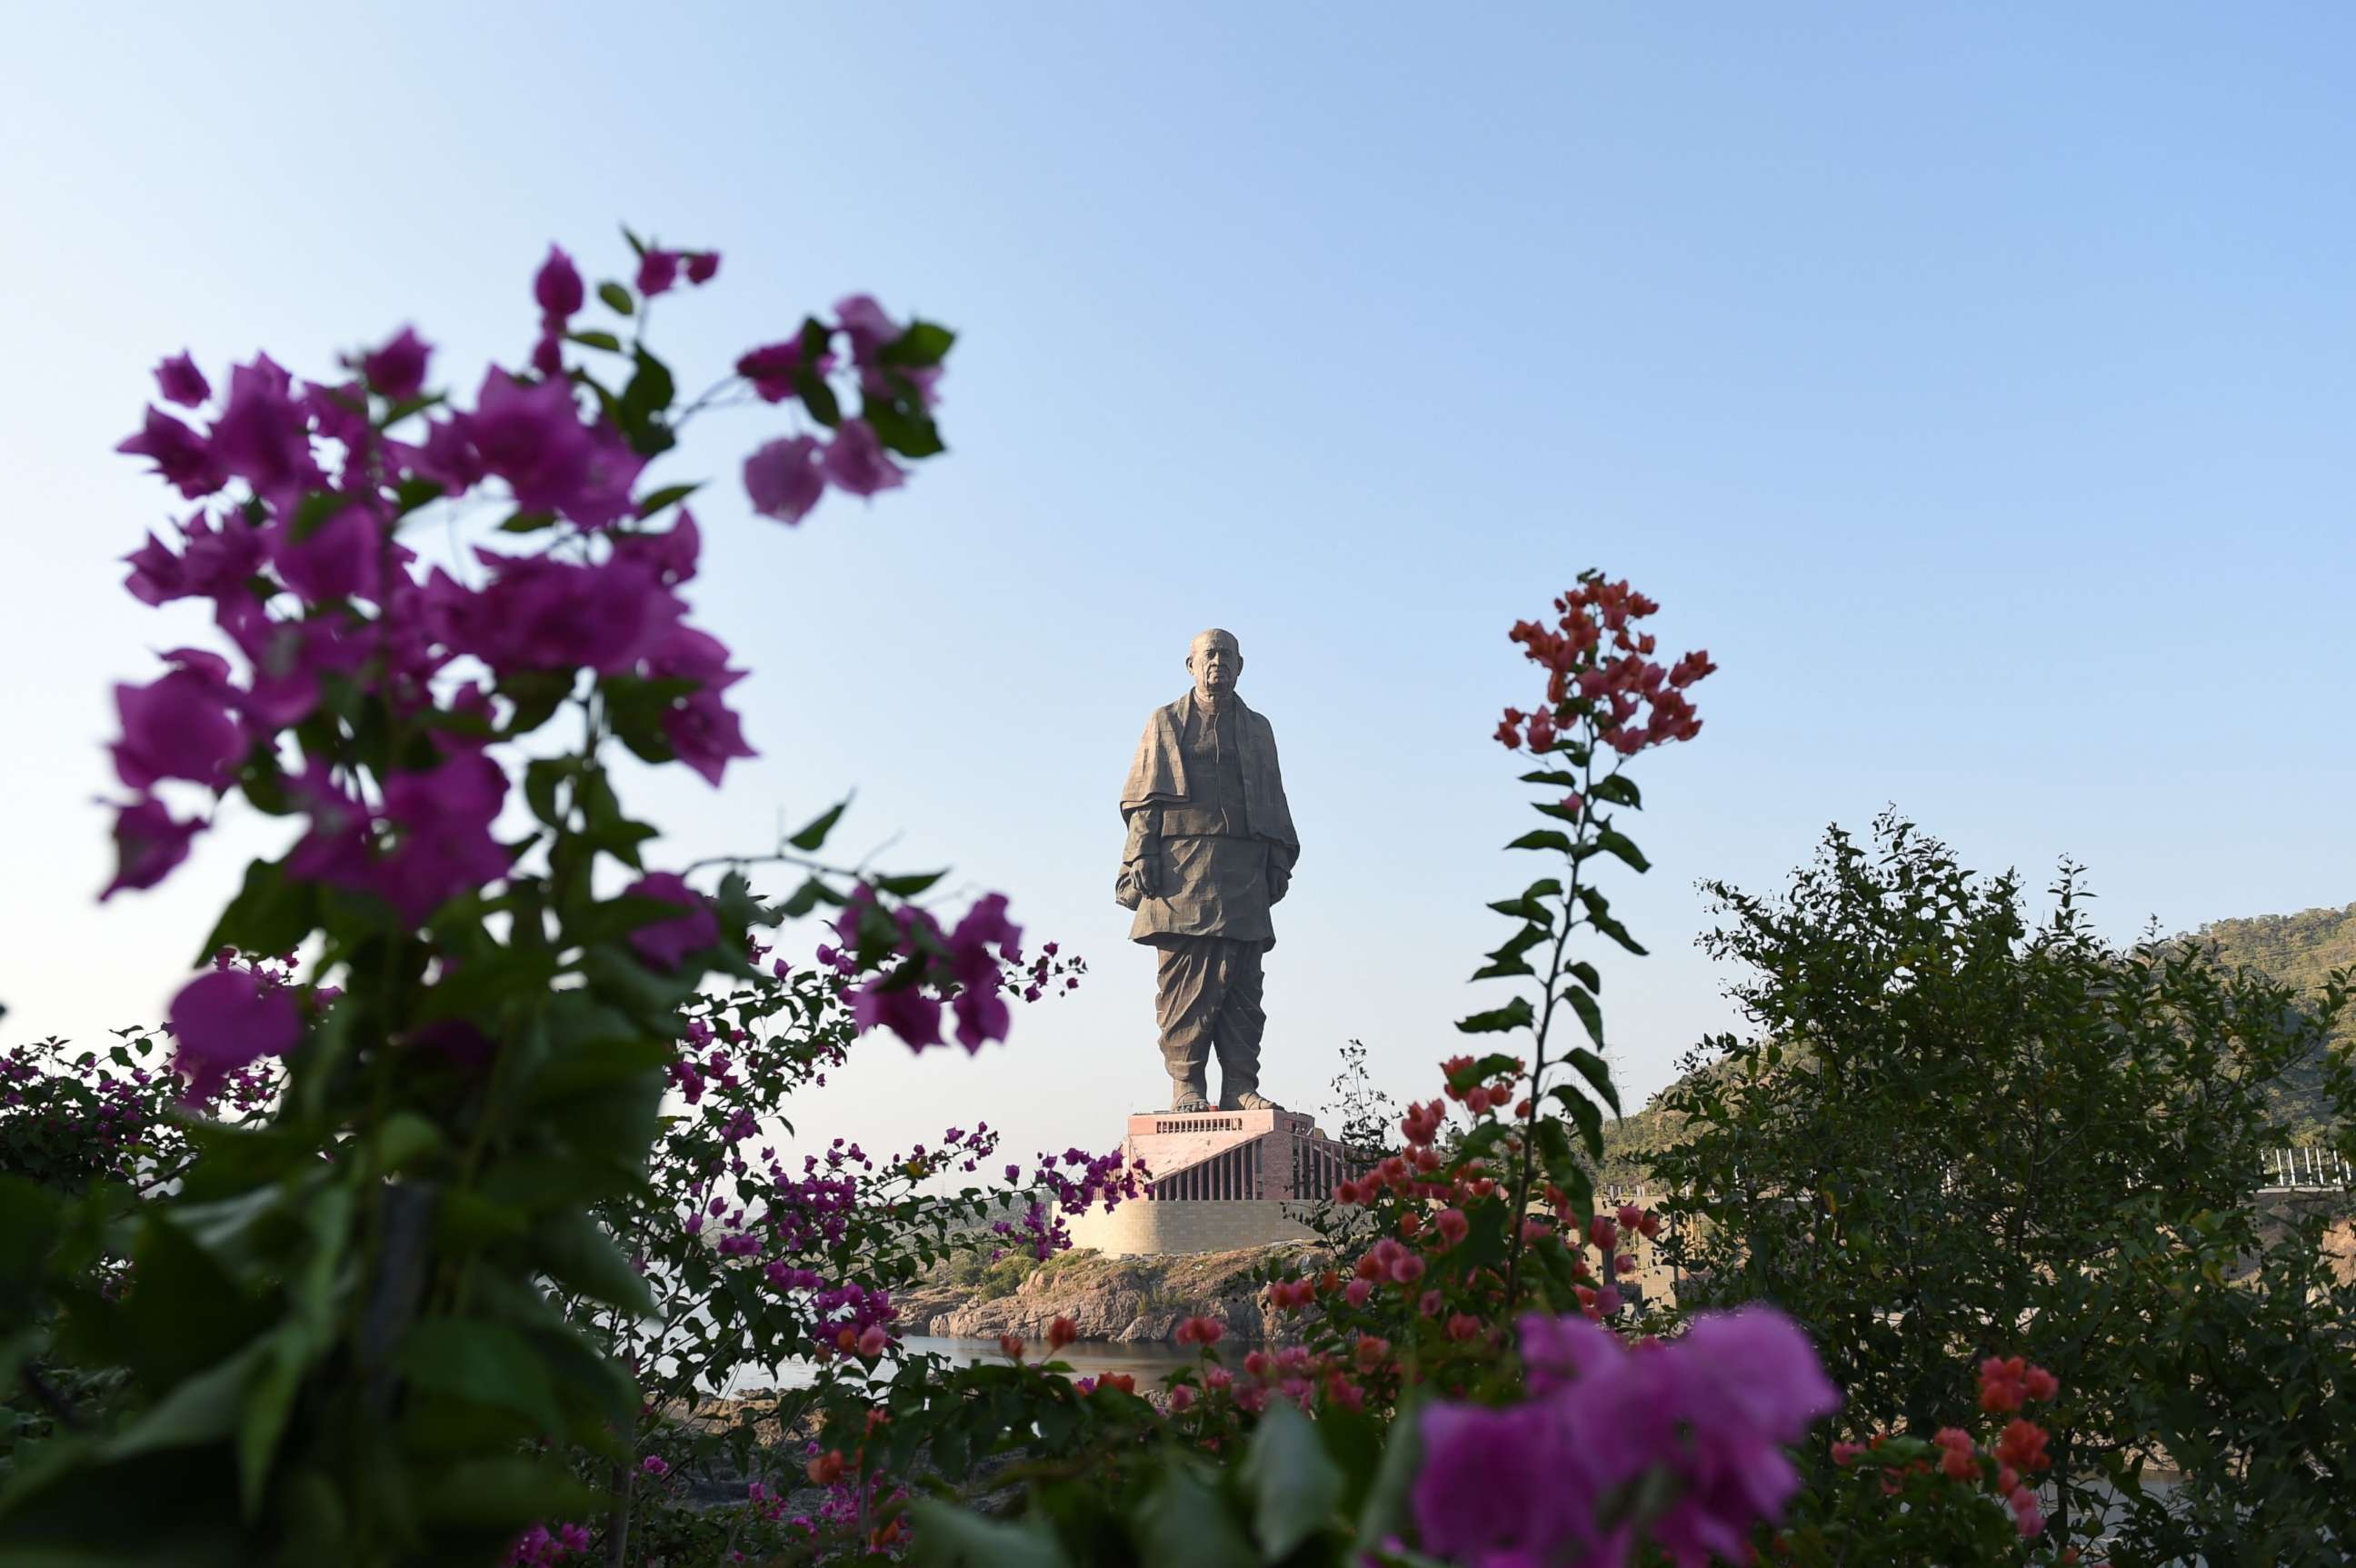 PHOTO: The "Statue Of Unity", the world's tallest statue dedicated to Indian independence leader Sardar Vallabhbhai Patel, stands overlooking the Sardar Sarovar Dam near Vadodara in India's western Gujarat state, Oct. 30, 2018.